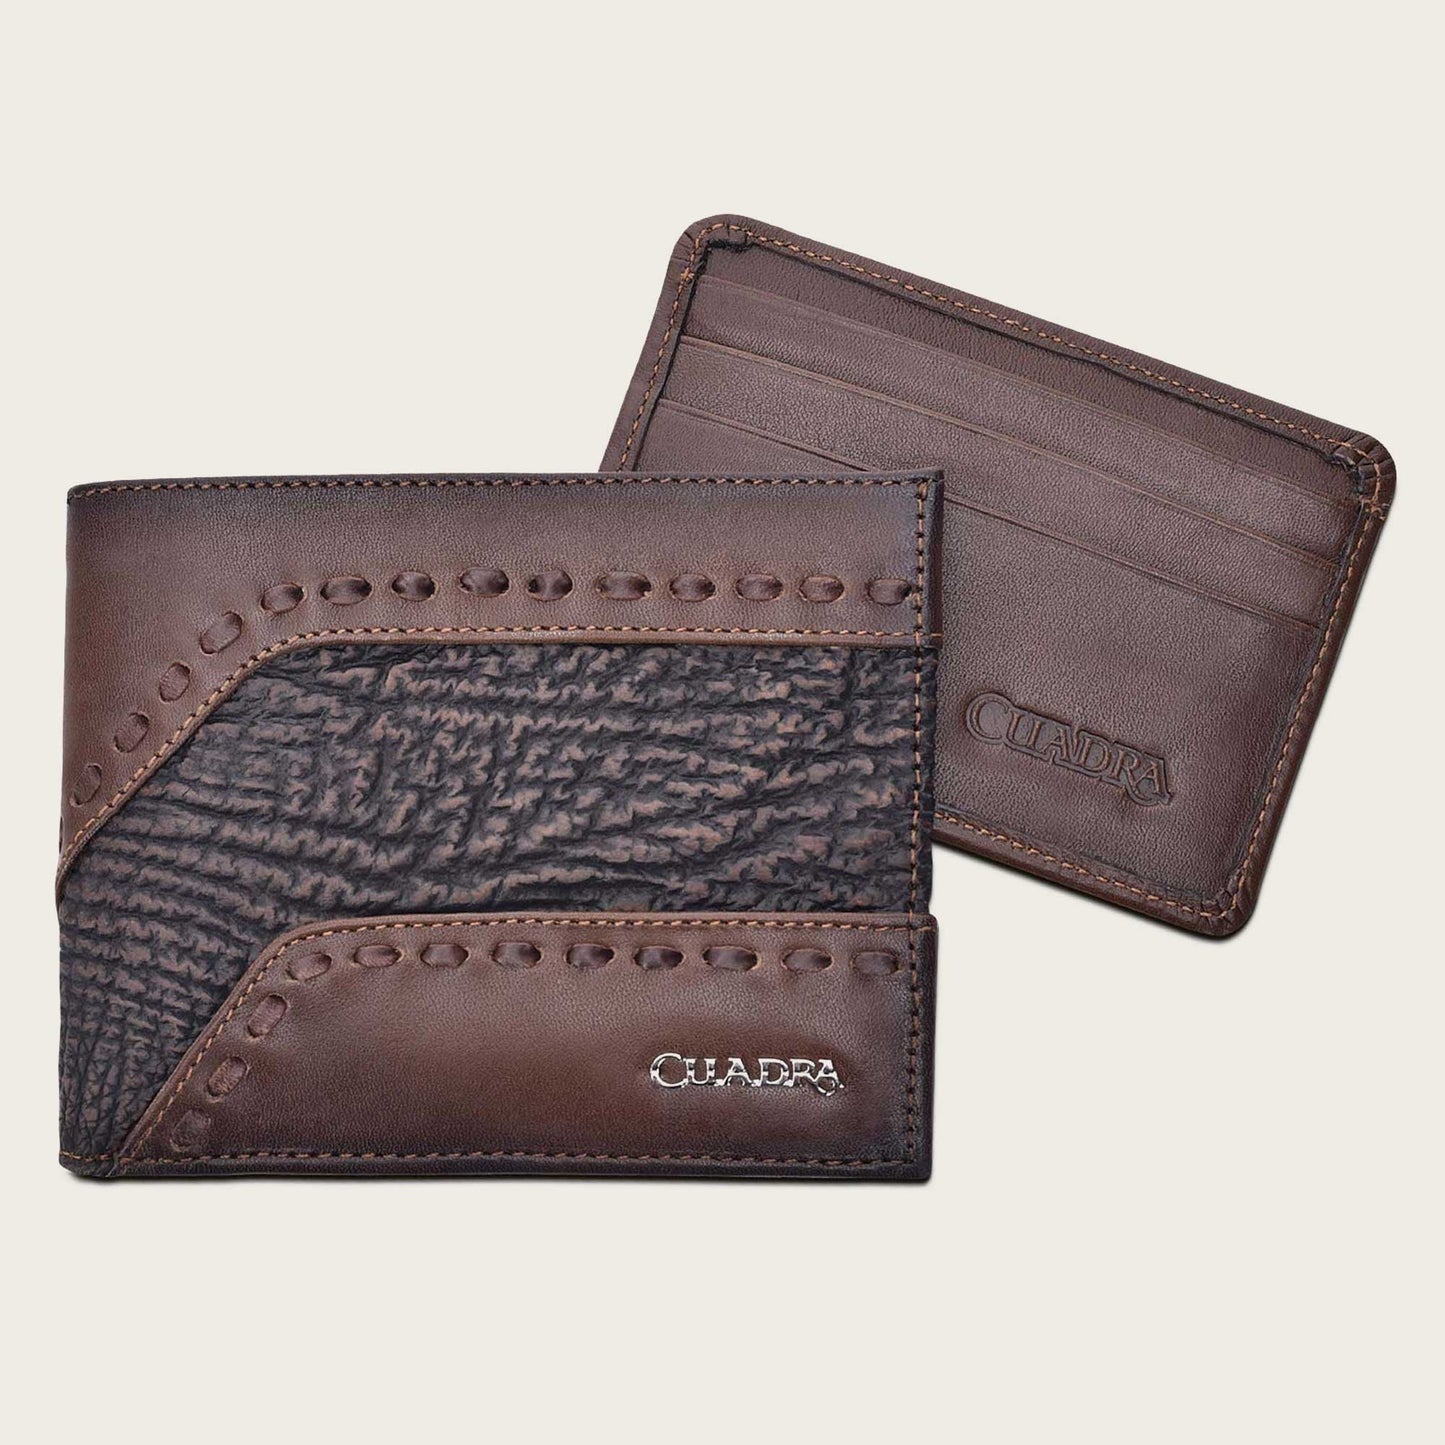 Handwoven brown leather bifold wallet